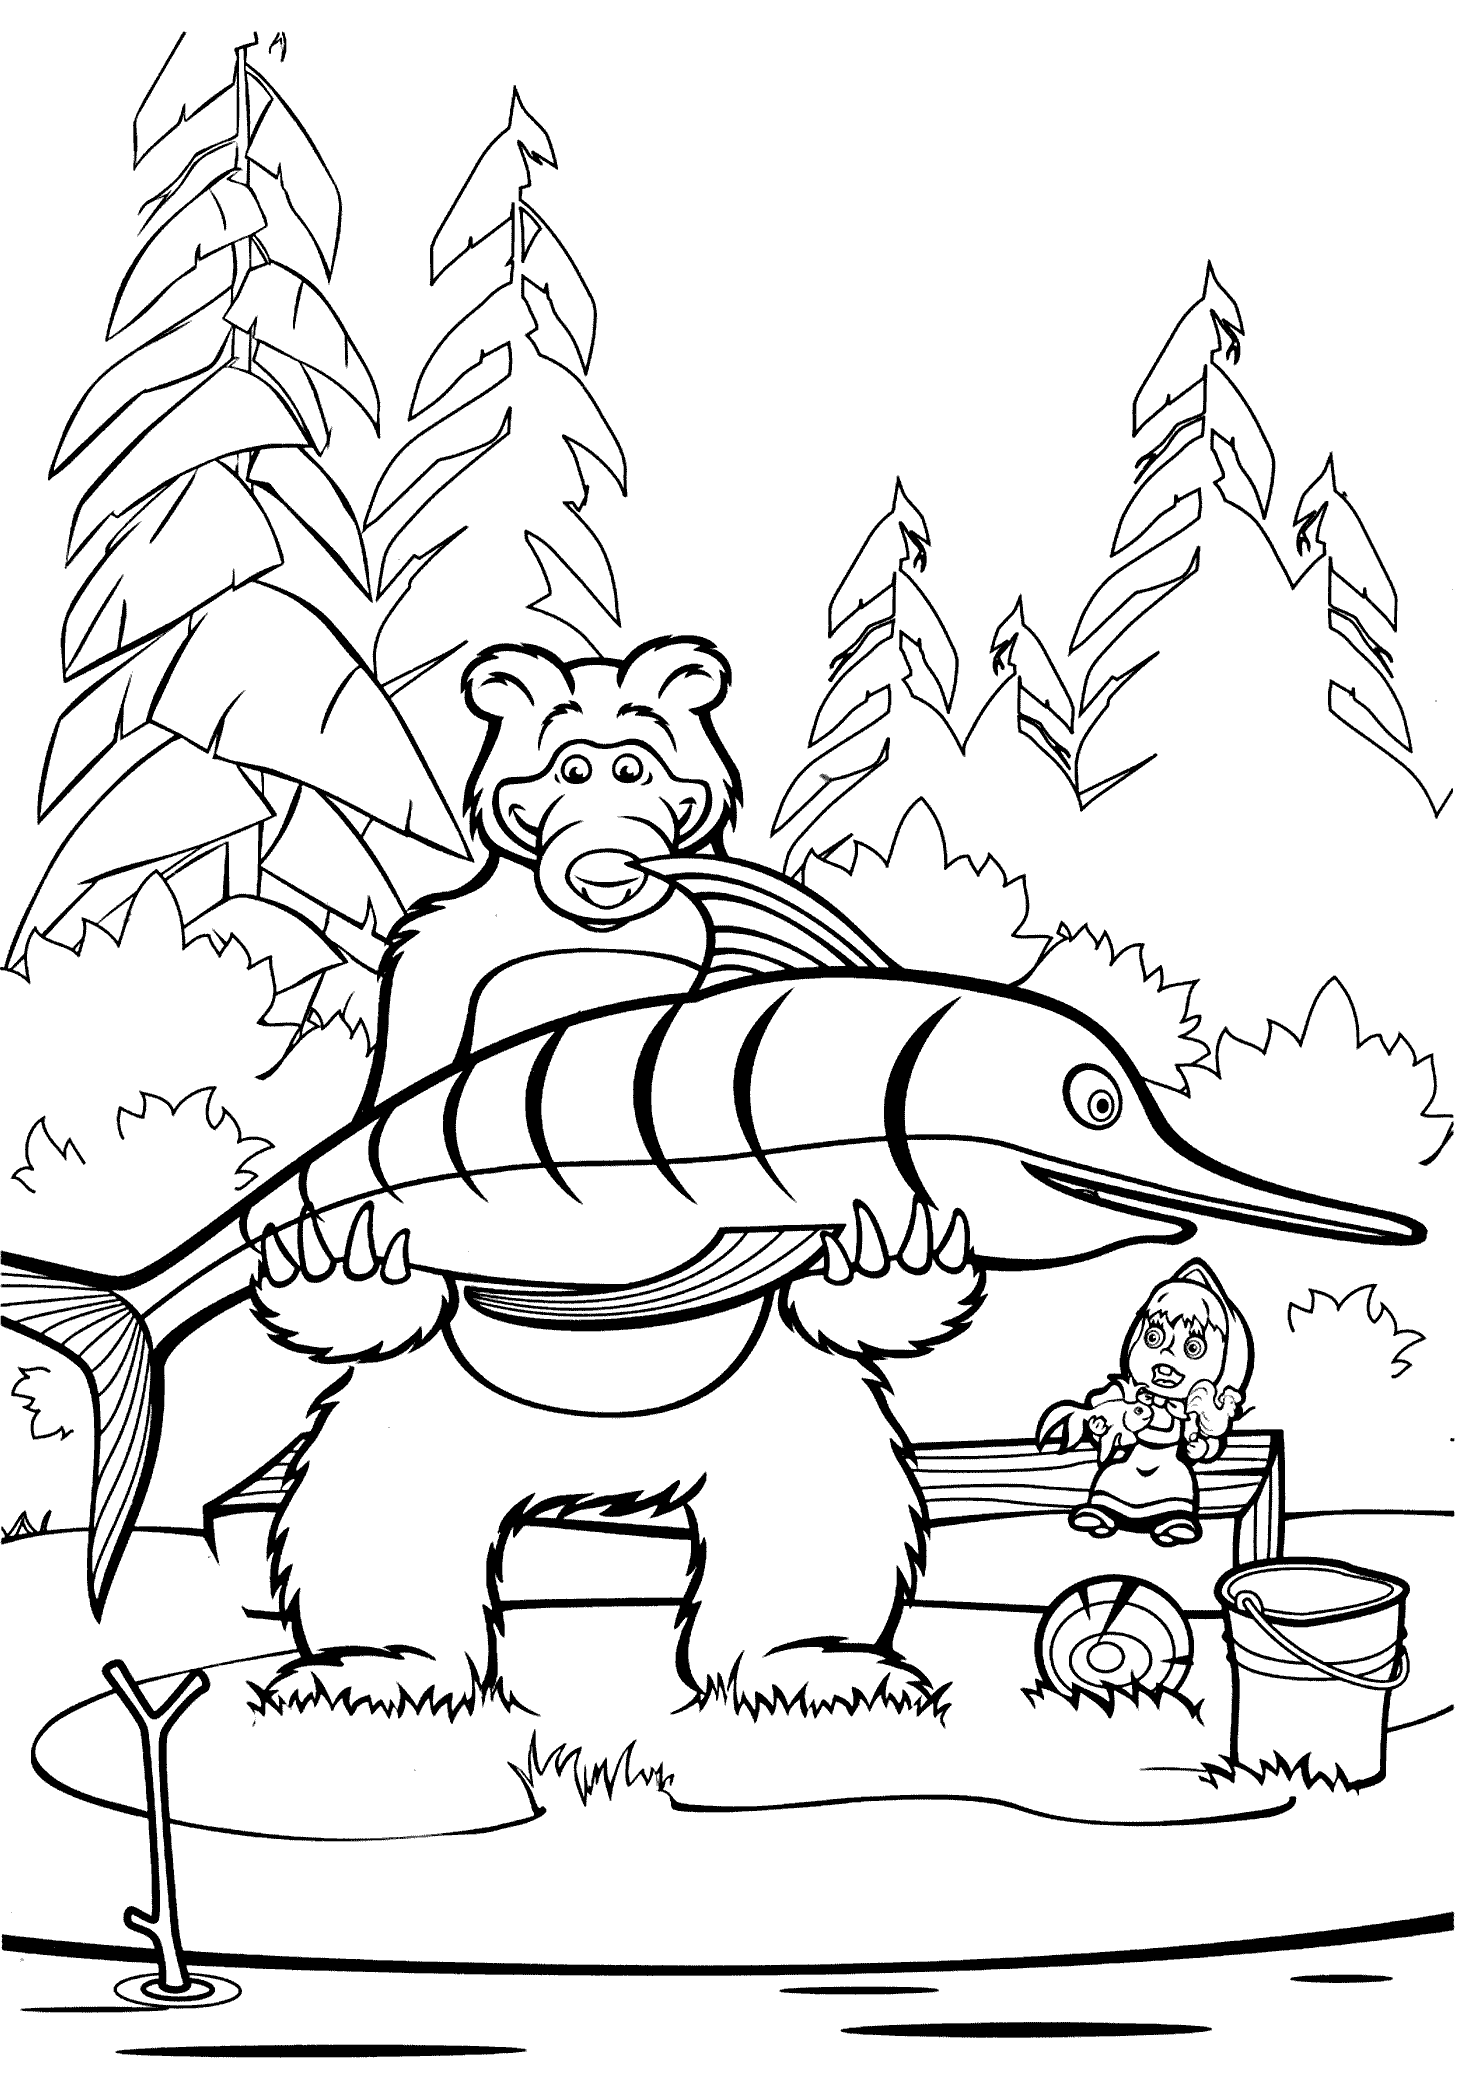 coloring pictures masha-and-the-bear,printable,coloring pages